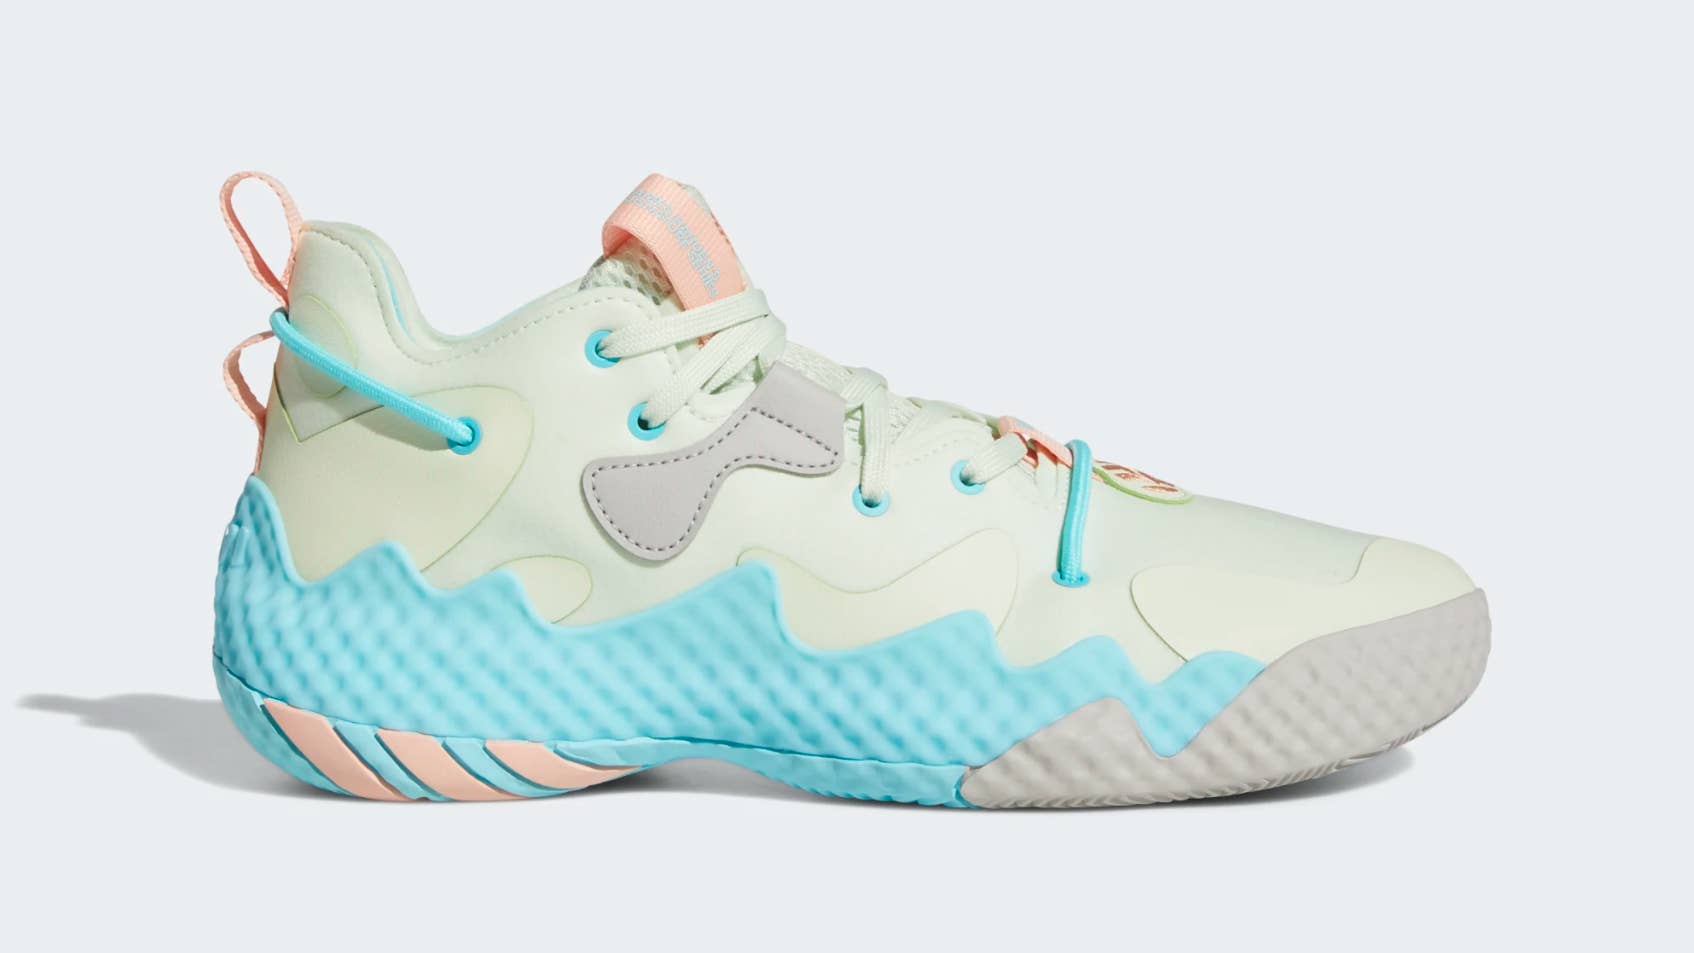 Harden's Next Adidas Shoe Dropping Soon | Complex